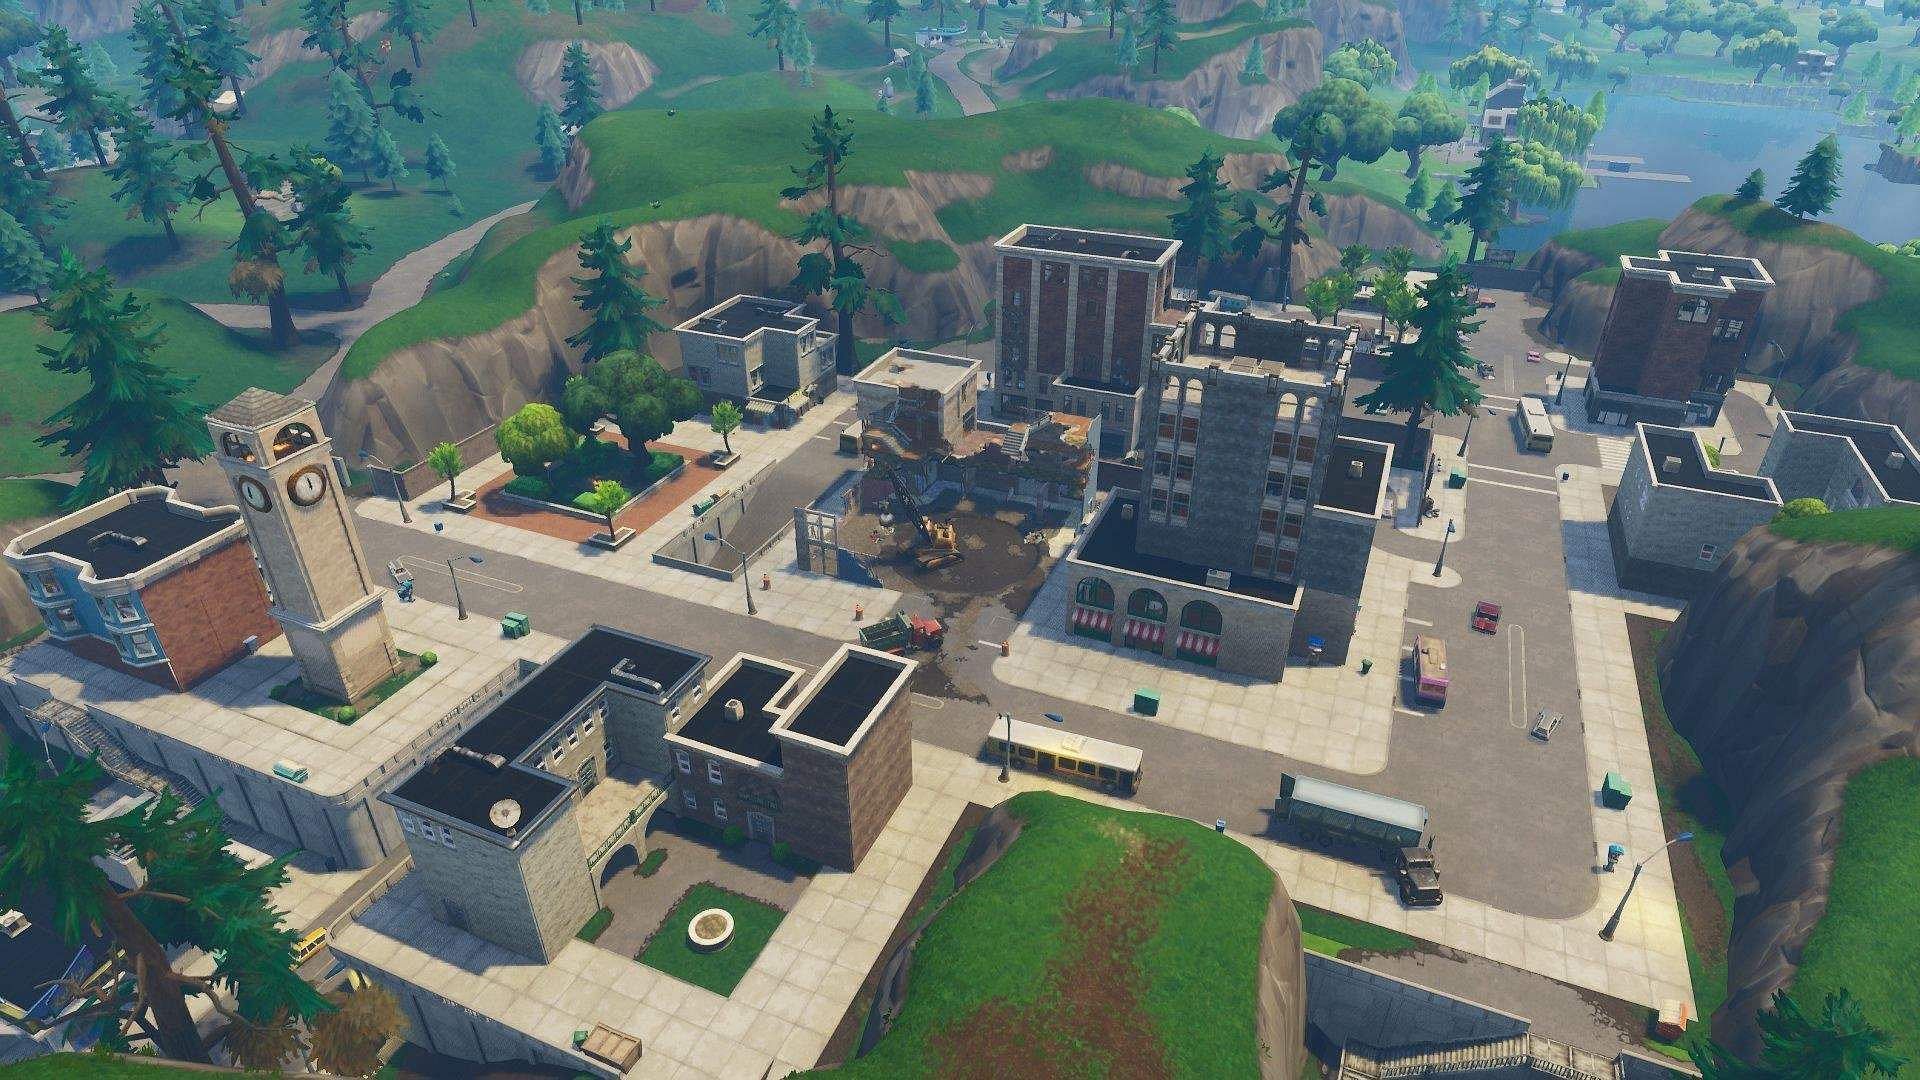 Tilted Towers was in one of the most popular Fortnite biomes (Image via Epic Games)